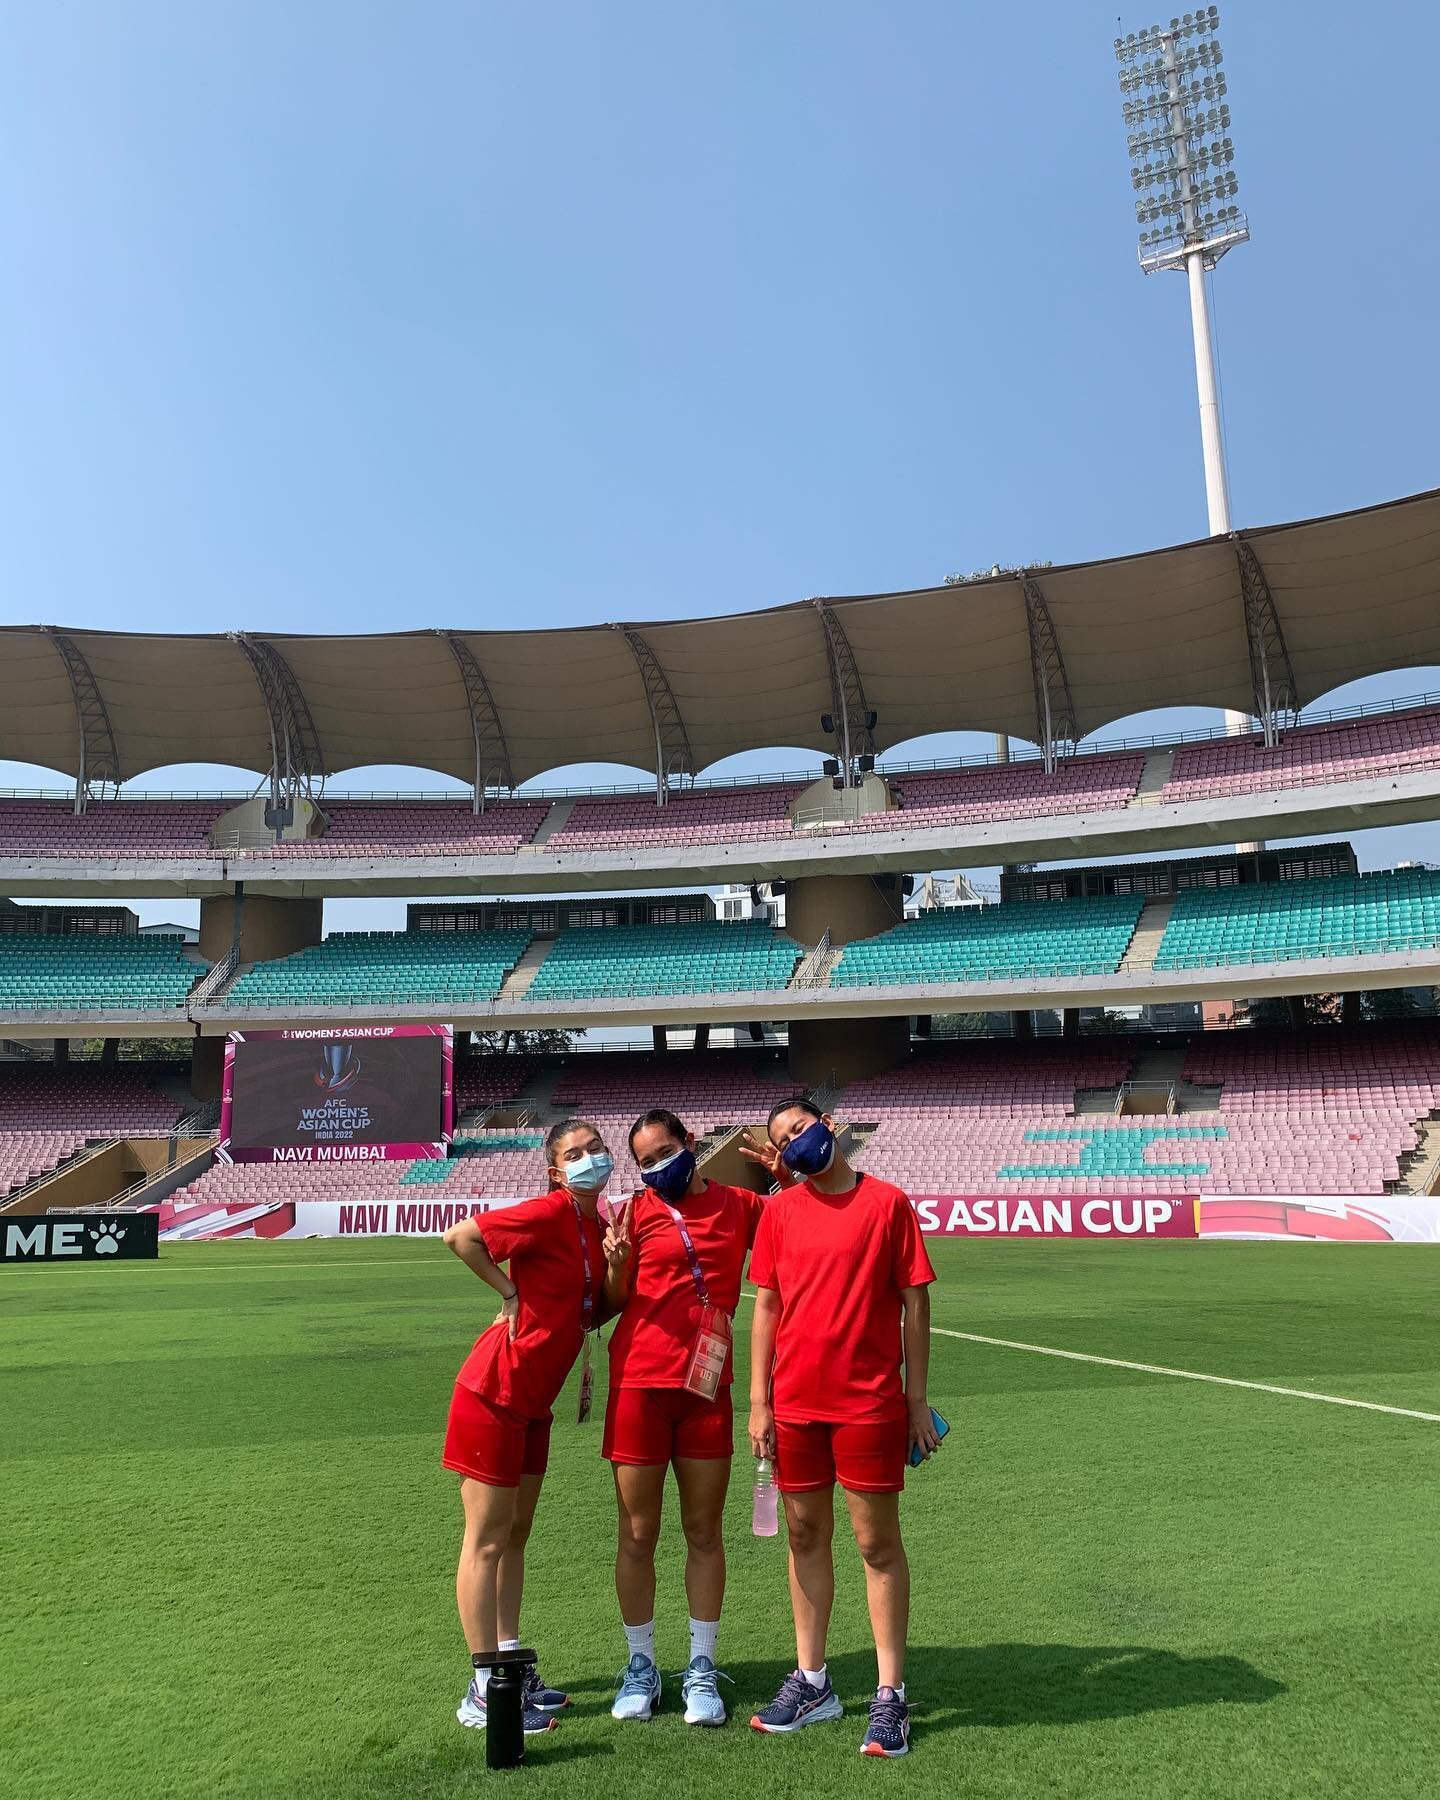 CRAZY8🤪

NEW YOUTUBE VIDEO ALERT‼️
Check out my new YouTube video, a recap of our journey at the AFC Women&rsquo;s Asian Cup India 2022 and qualifying for the FIFA Women&rsquo;s World Cup!🤩
&bull;
&bull;
&bull;
&bull;
#fifawomensworldcup #wac2022 #